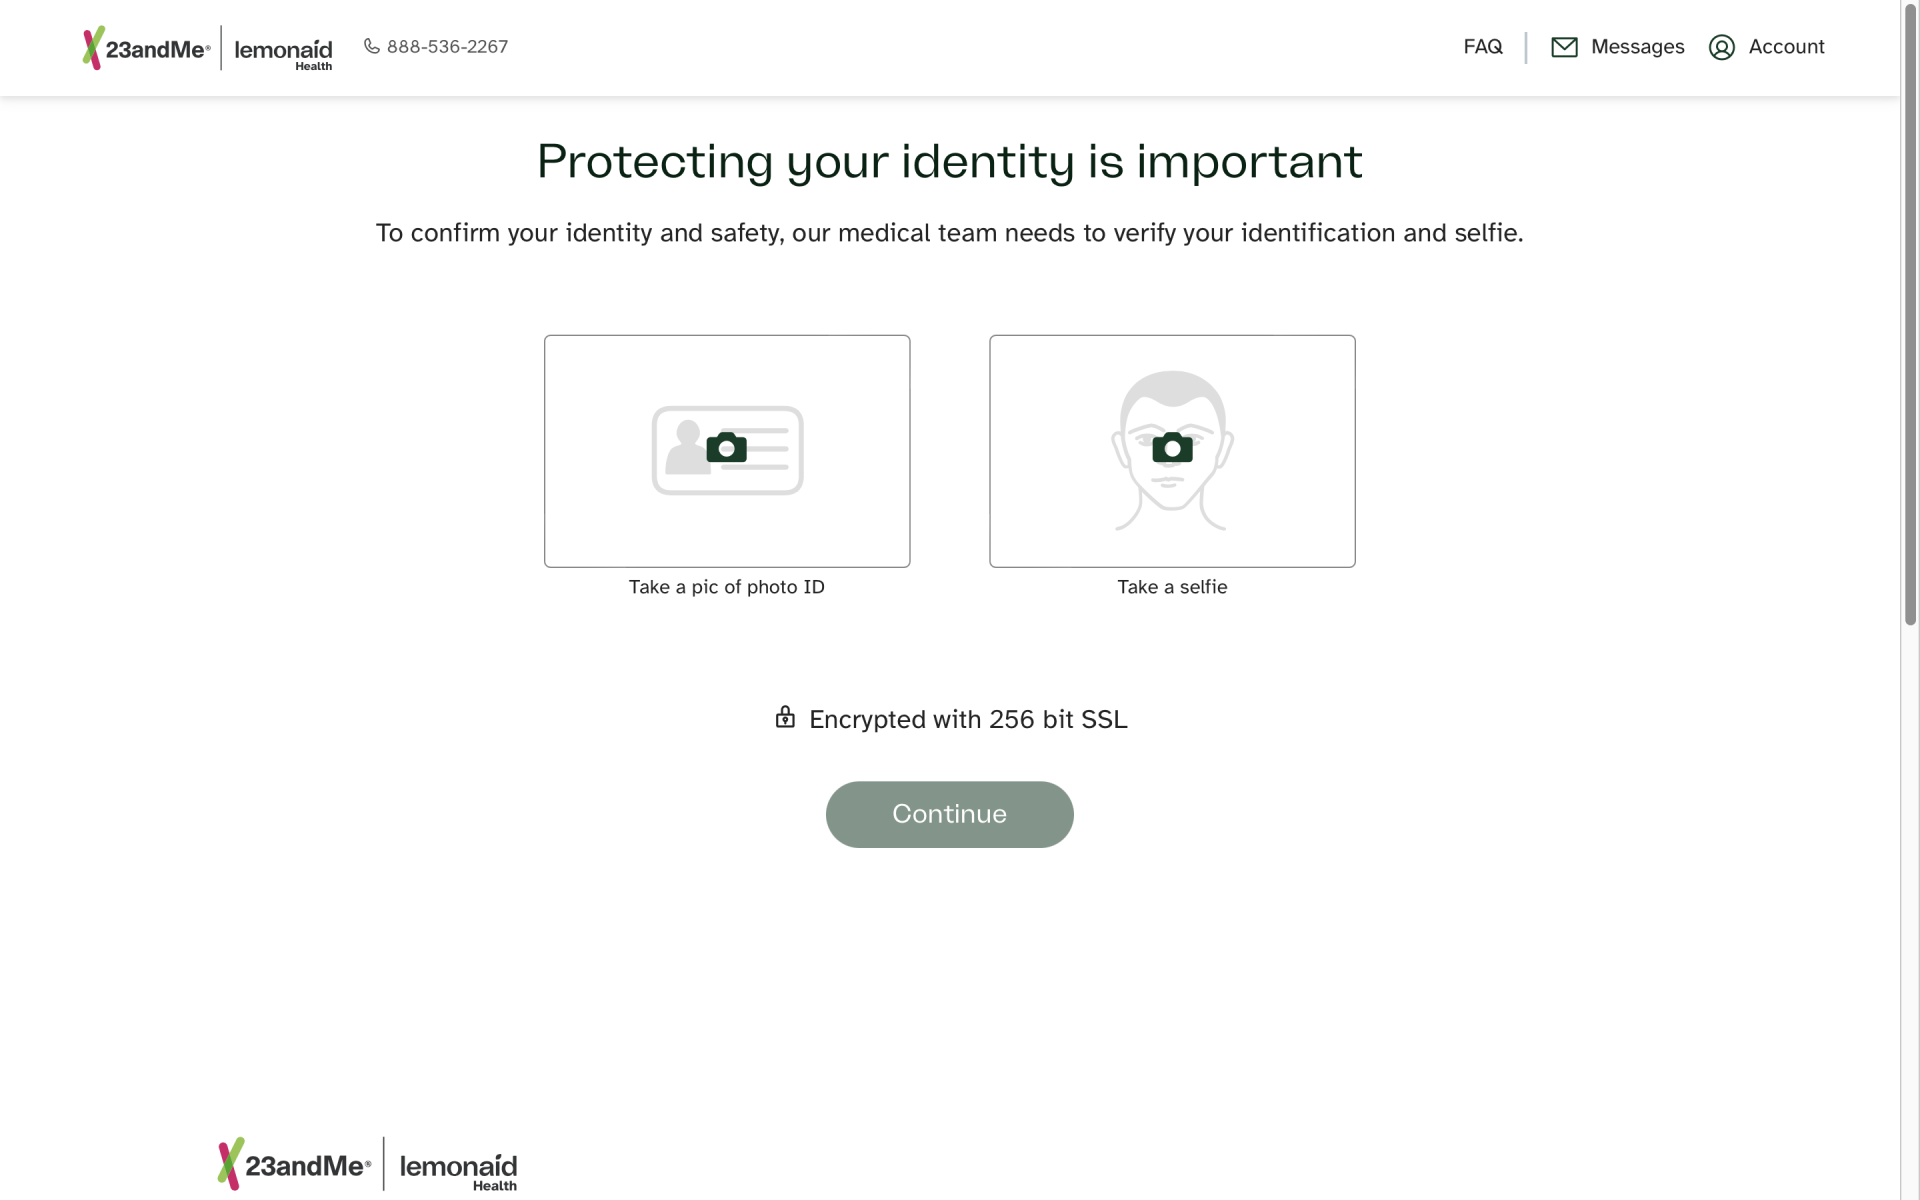 Screenshot of Lemonaid Health proof of identity requirements on the new-patient intake form with instructions for uploading a legal photo ID and a live selfie picture